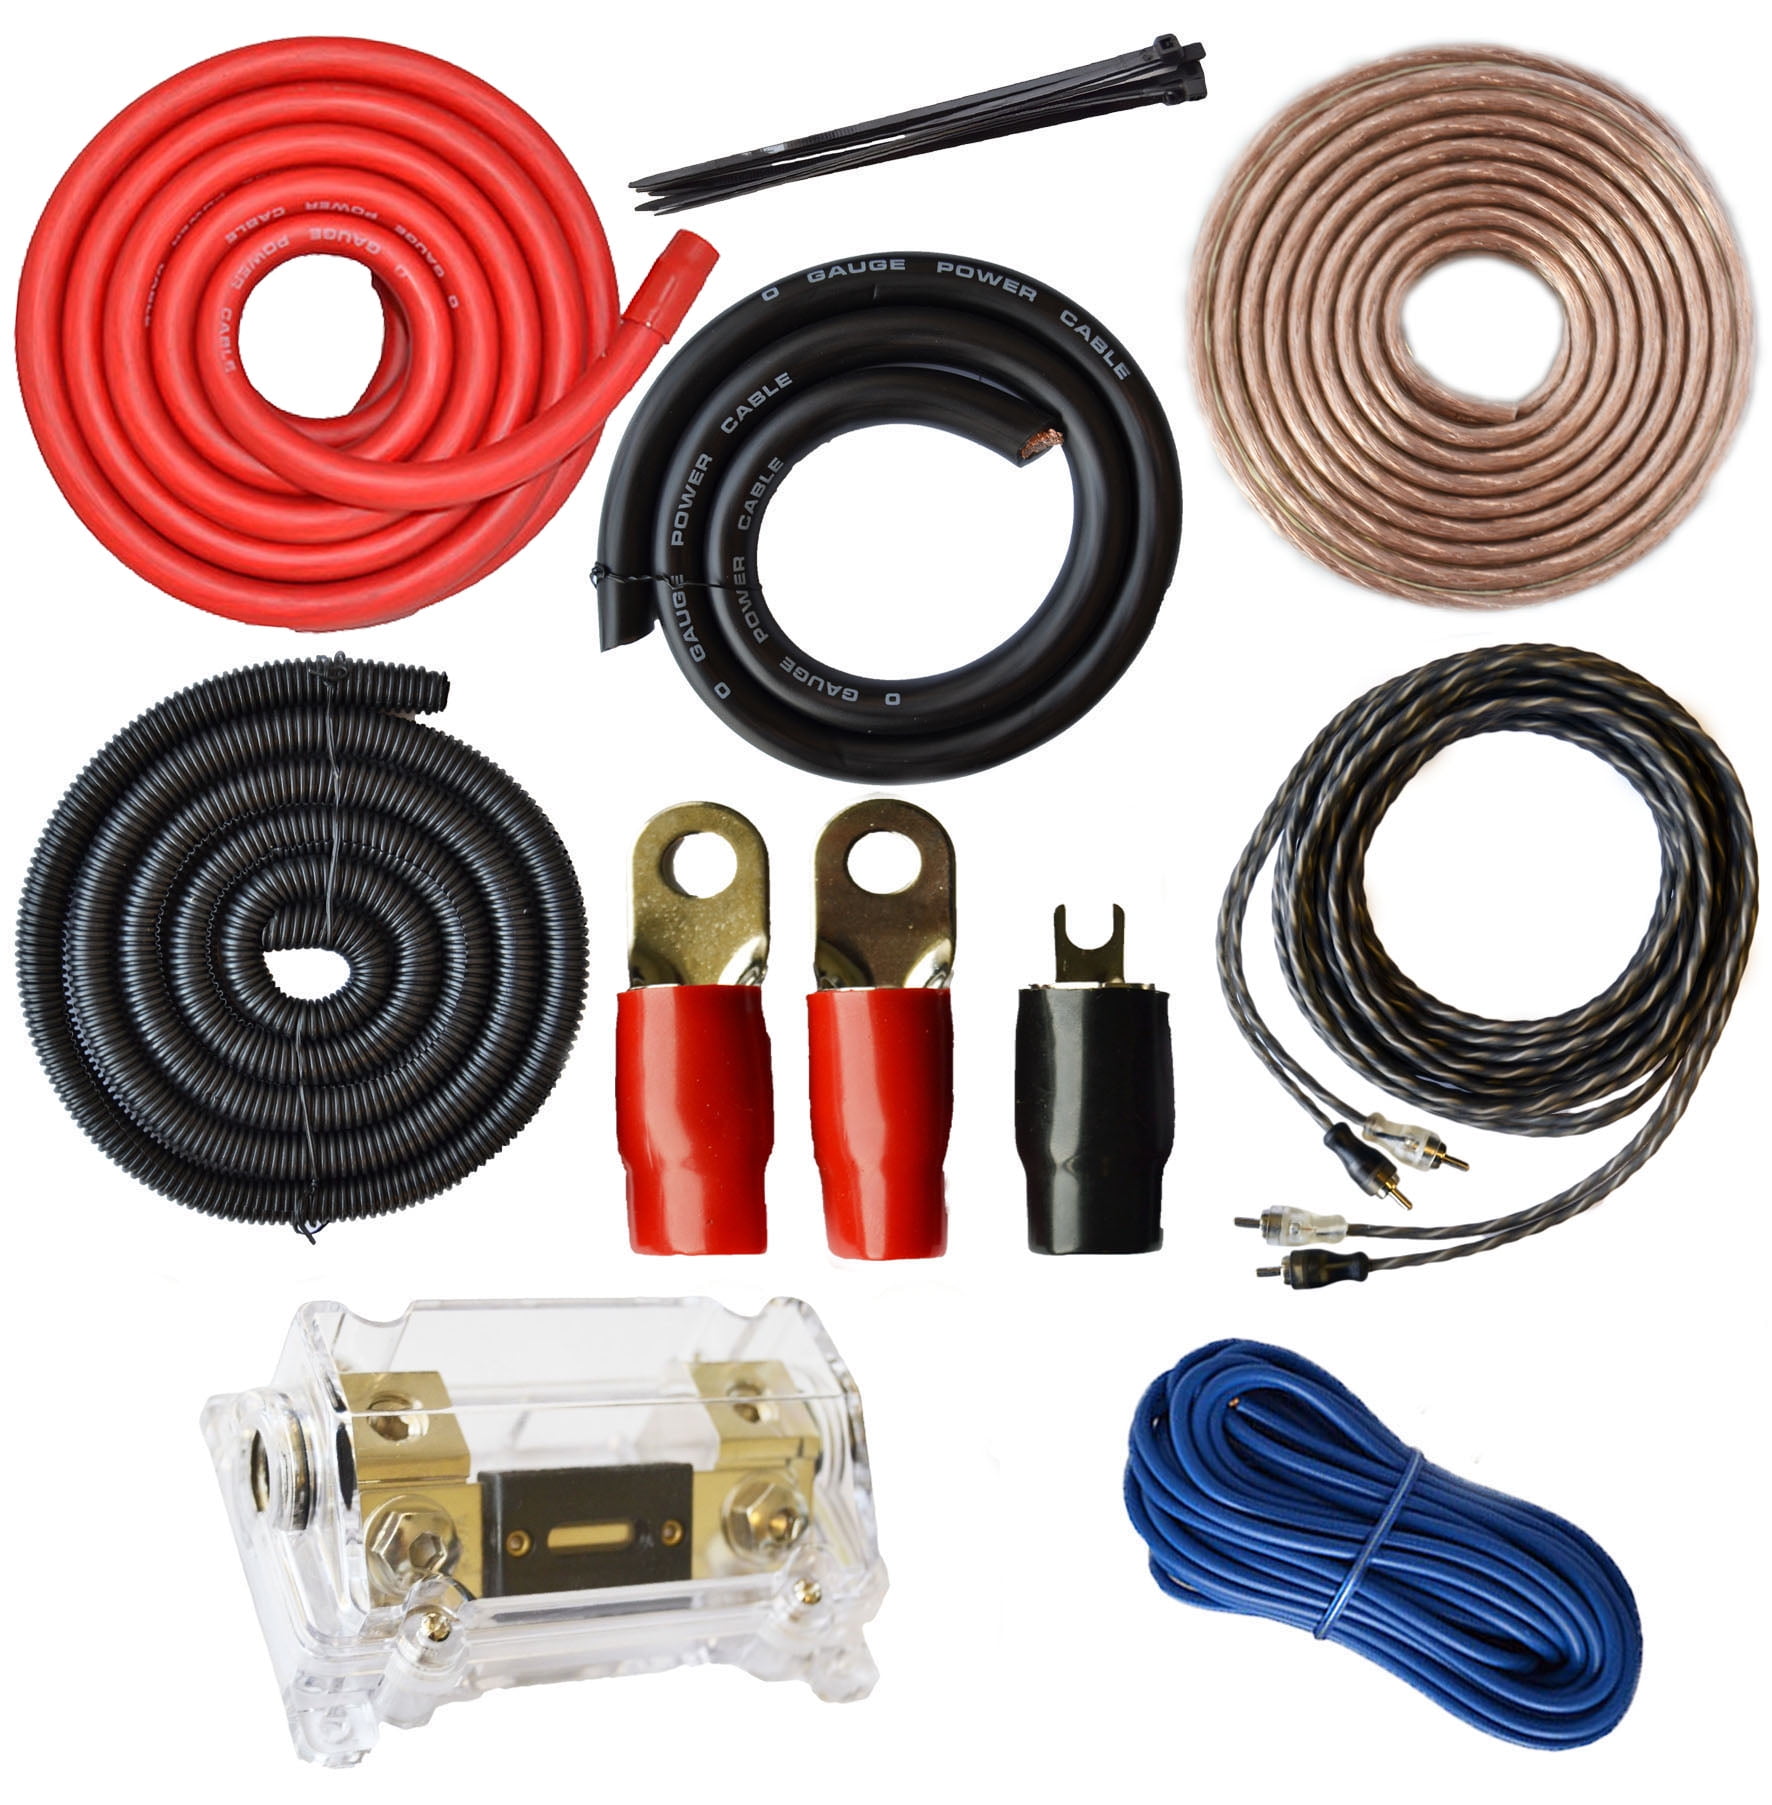 0 Gauge Amplfier Power Kit for Amp Install Wiring Complete 1/0 Ga Cables 4500W 